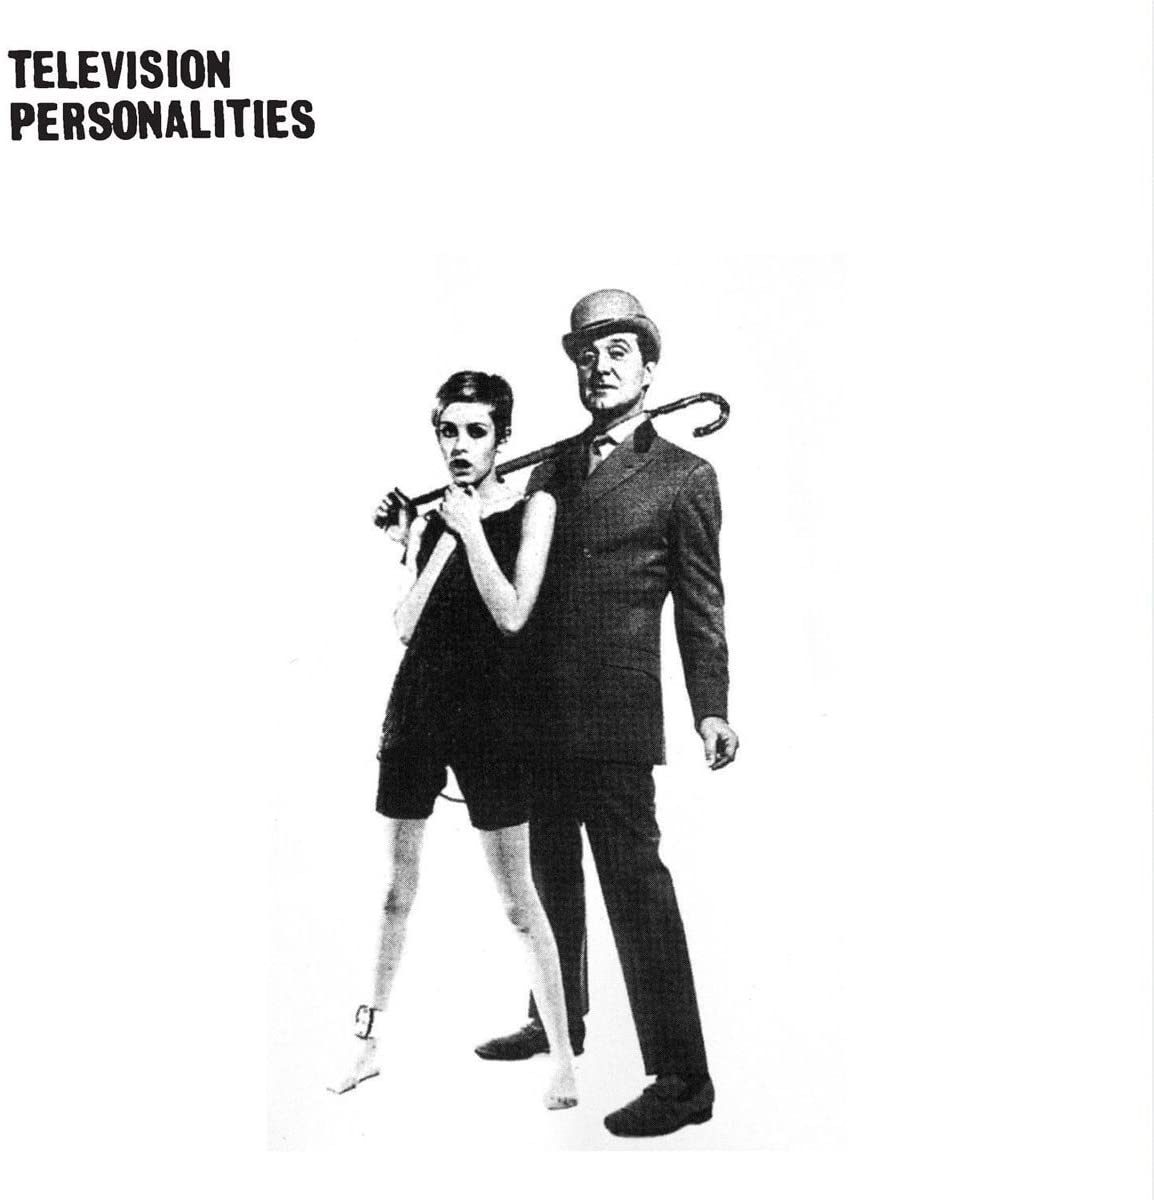 Television Personalities - And Don’t The Kids Just Love It